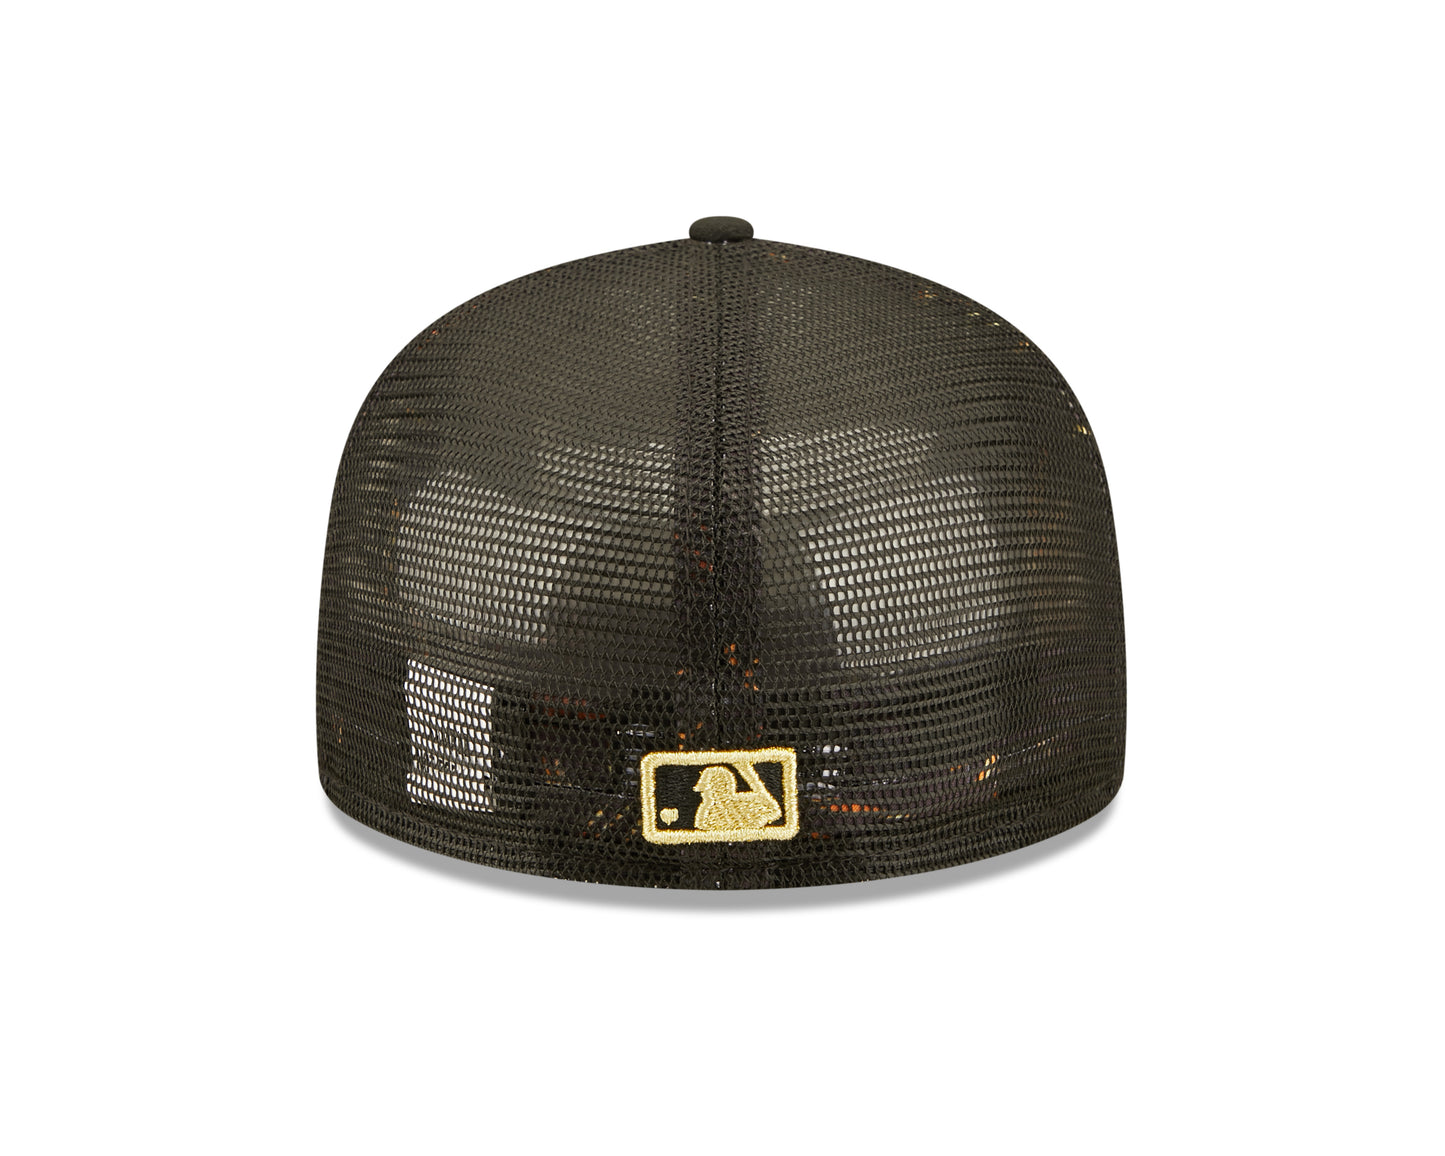 San Francisco Giants New Era MLB All-Star Game Workout 59FIFTY Fitted Hat